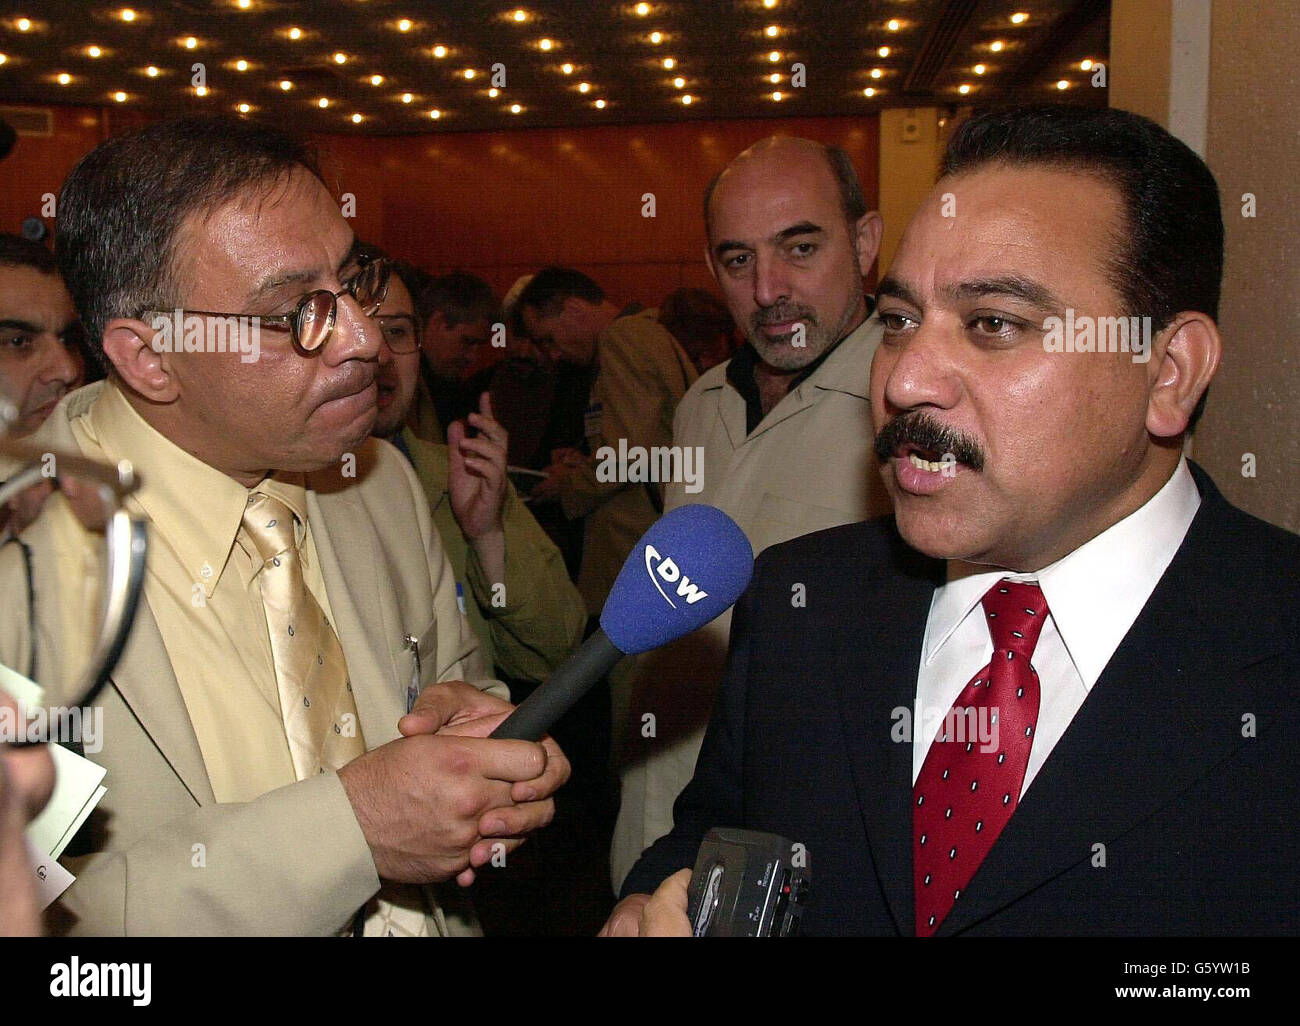 Brigadier Najib al-Salihi speaking to reporters as he arrives for the conference held for members of the Iraqi National Congress, former military leaders from the country, and others opposed to the regime, at Kensington Town Hall, London. * The meeting was held by the Iraqi National Coalition Military Alliance. The meeting comes a day after the newspaper USA Today reported a Pentagon official as saying the US would only start an invasion of Iraq if Saddam Hussein made the first move. Stock Photo